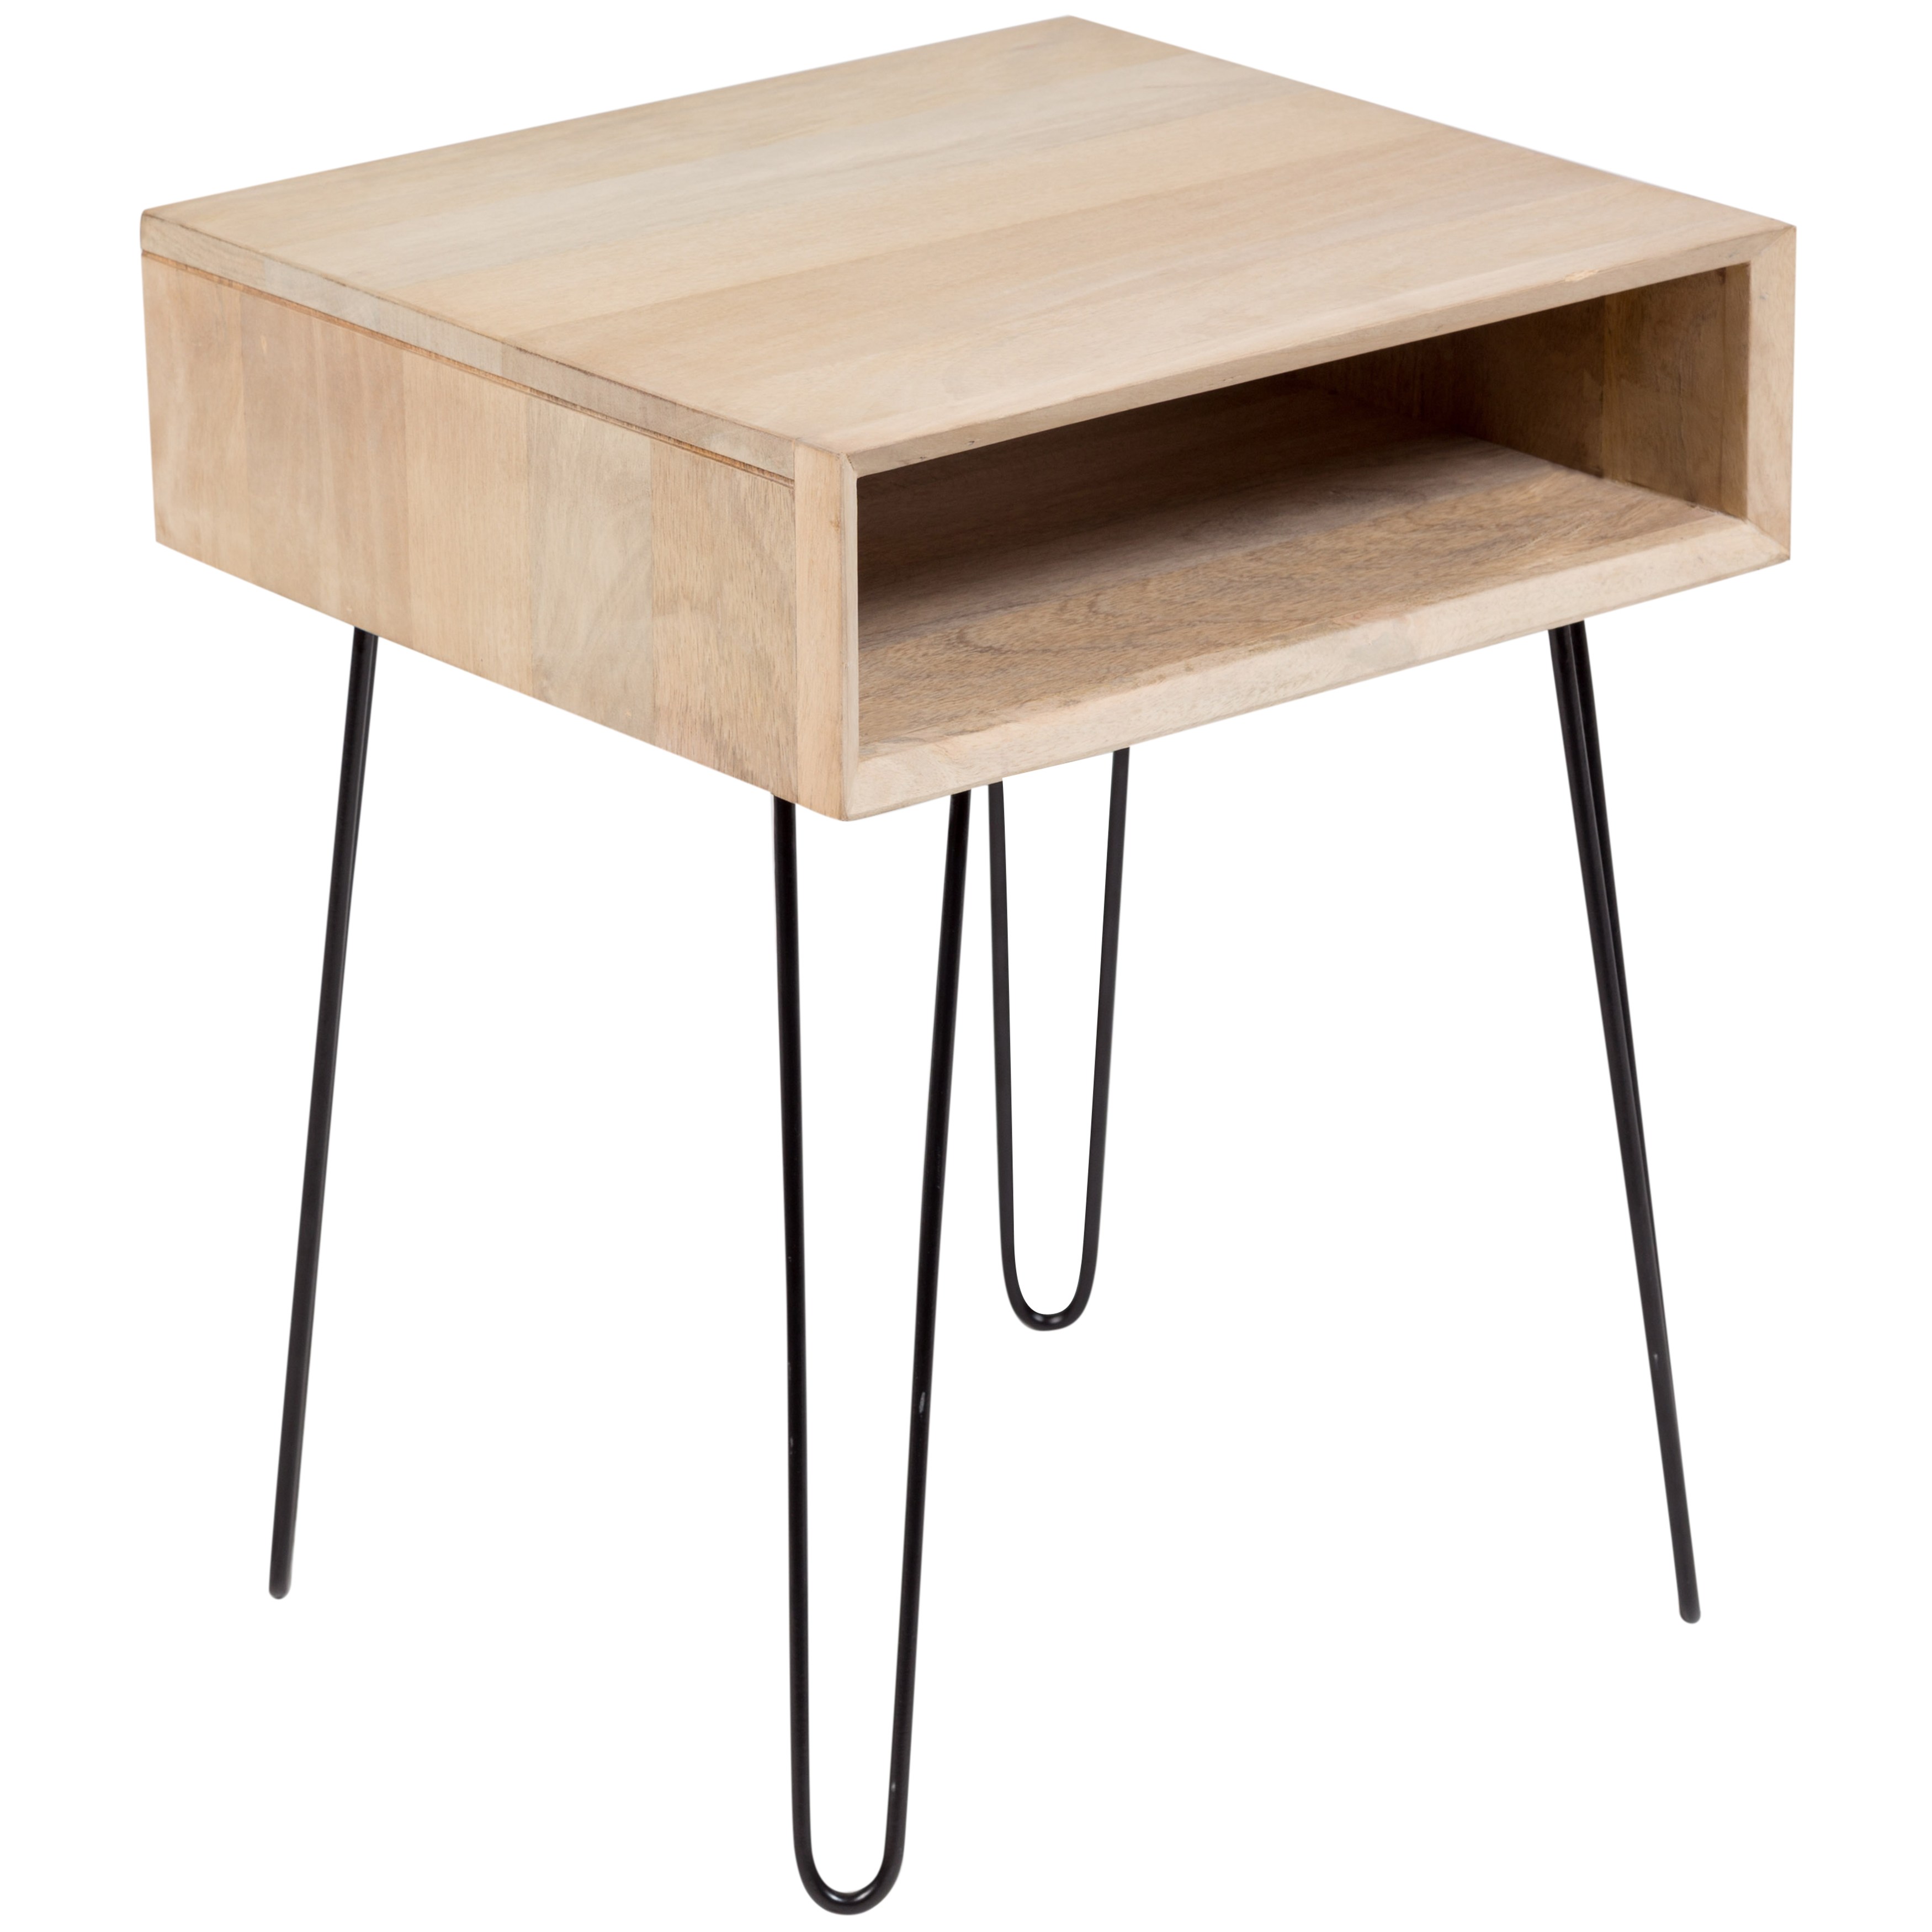 handmade wanderloot graphik mango wood end table with hairpin legs room essentials accent free shipping today seating for small spaces entryway chest mid century modern furniture